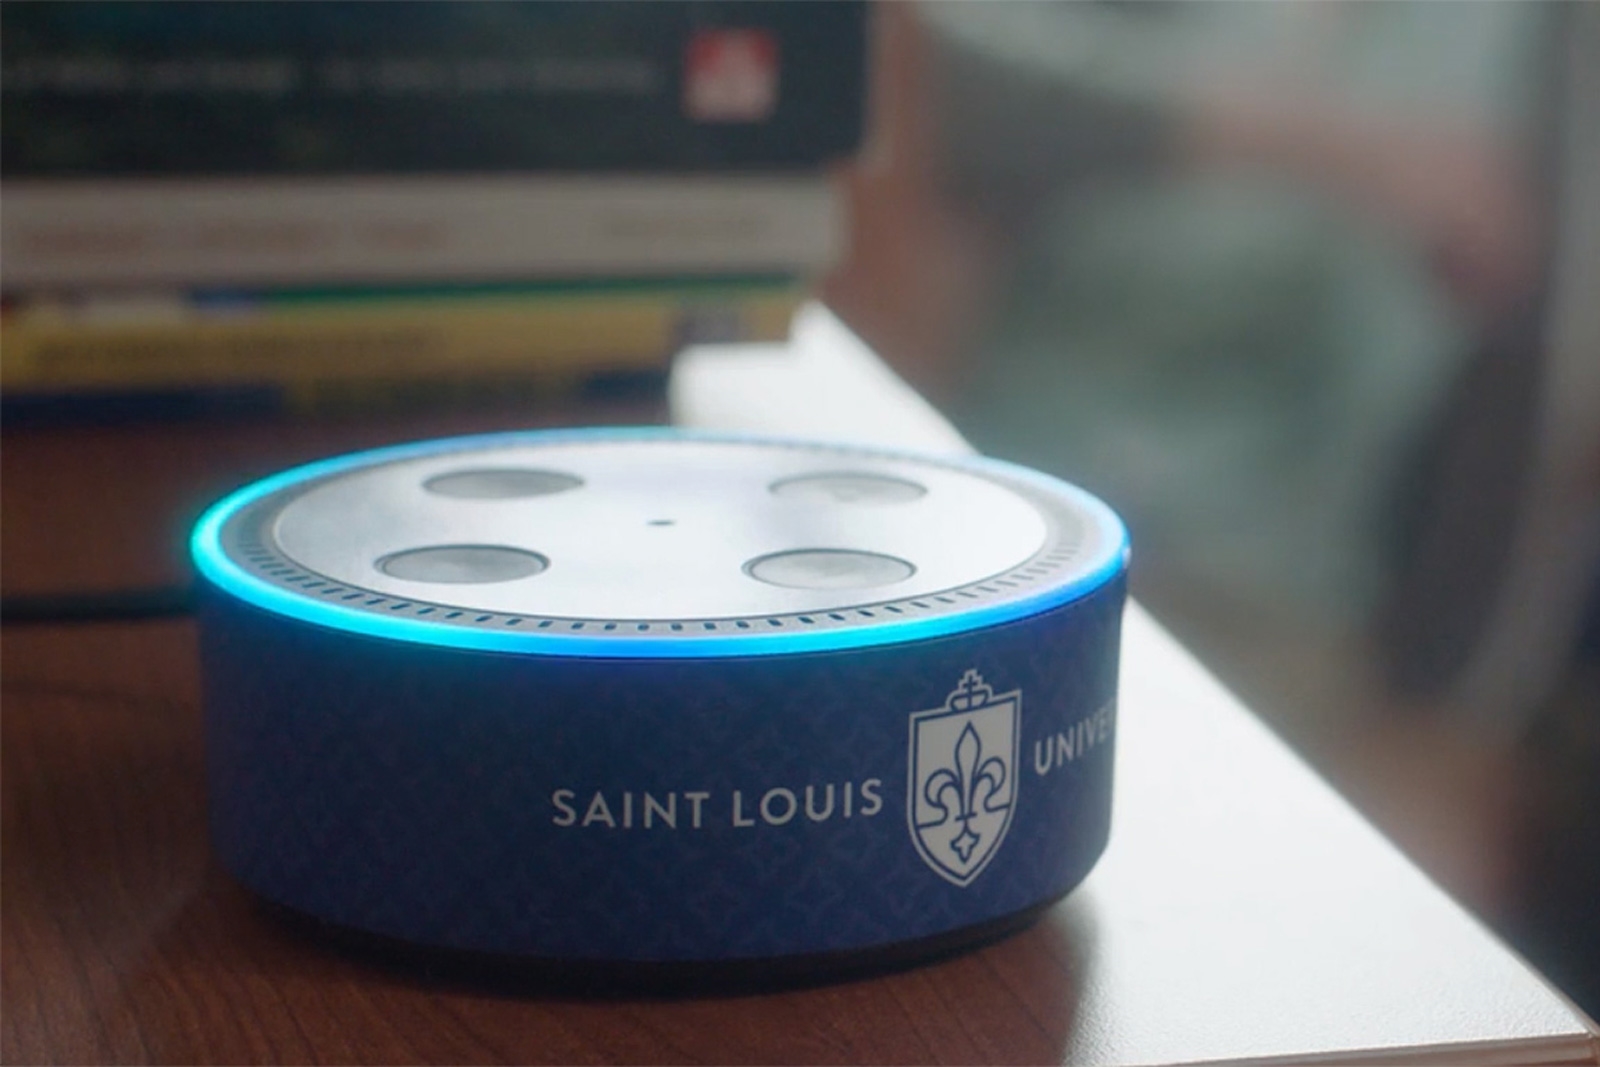 Saint Louis University will put 2,300 Echo Dots in student residences | DeviceDaily.com